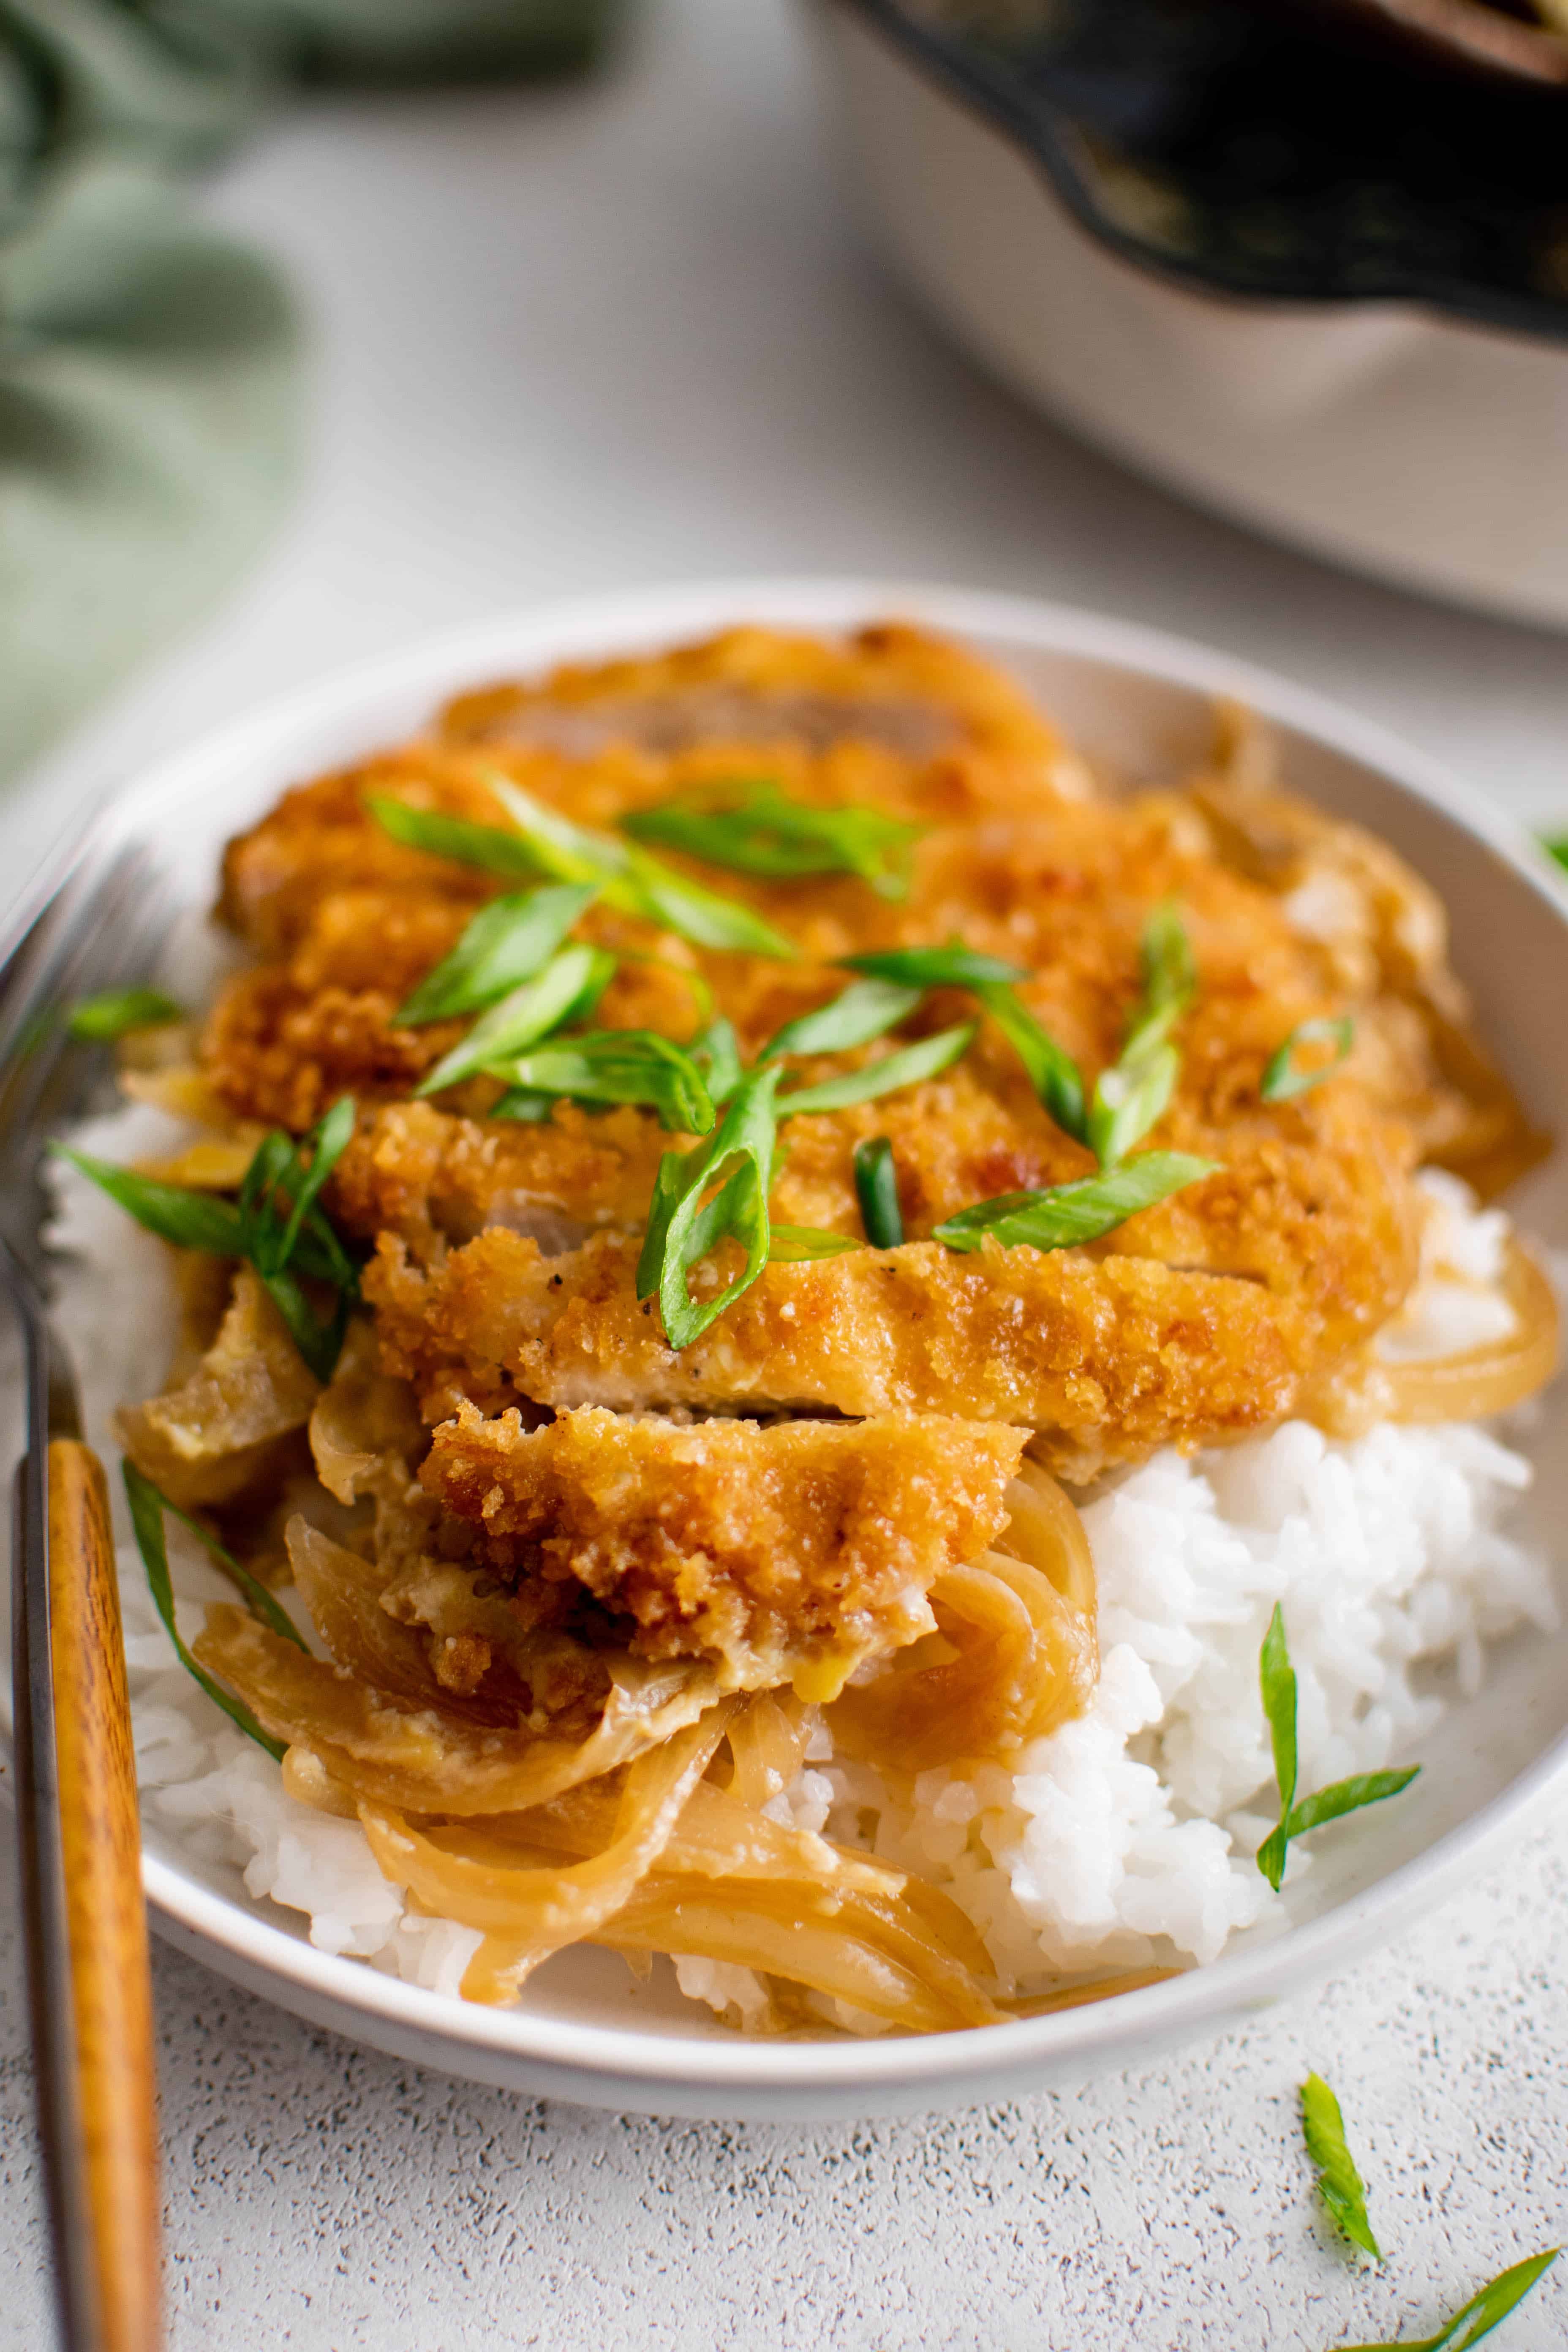 White shallow bowl filled with cooked white rice topped with sauteed onions and a breaded and deep-fried pork cutlet (katsu) that's been cooked in a sweet and savory sauce and topped with thinly sliced green onions.